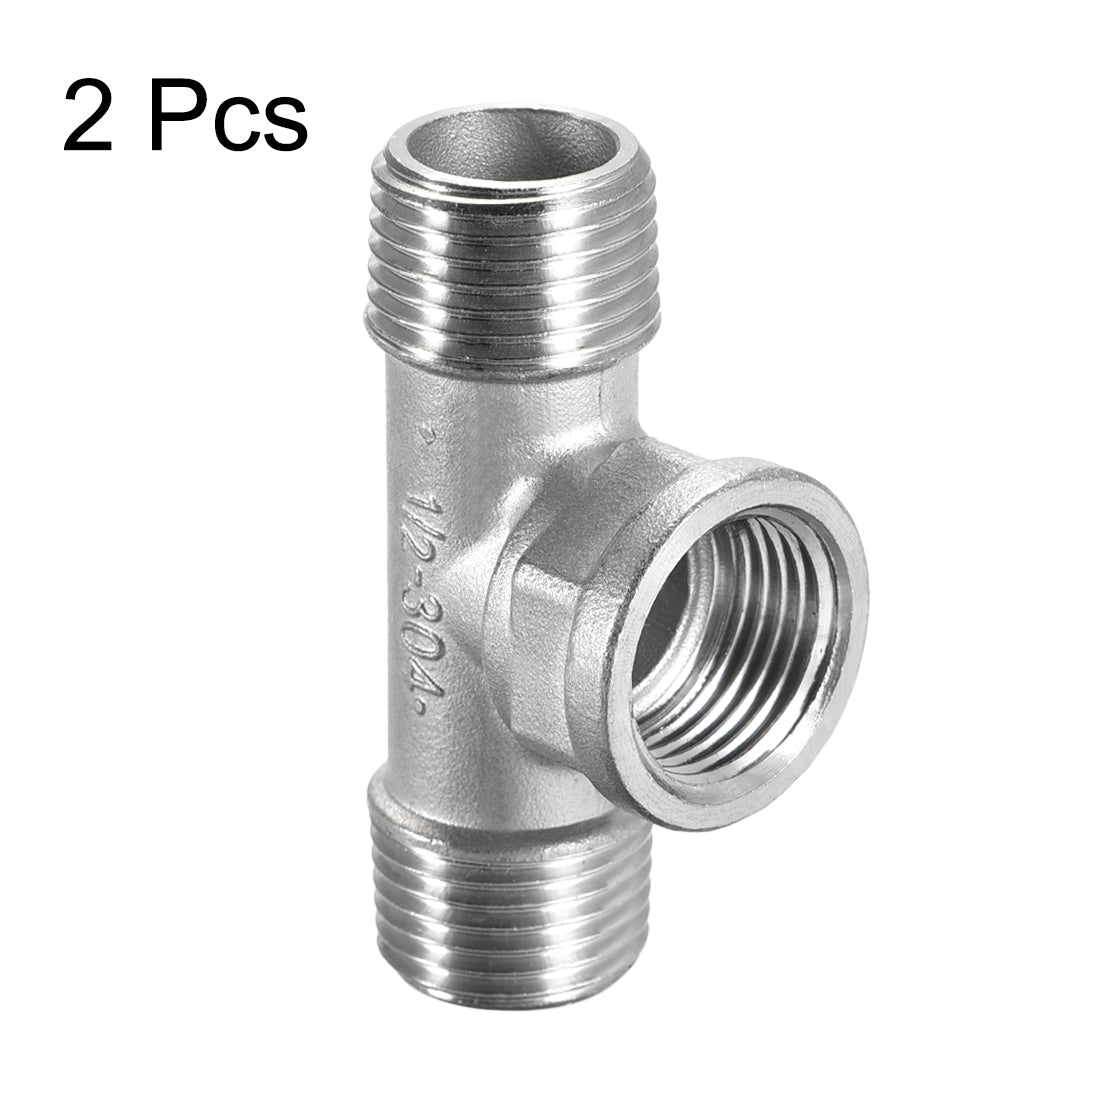 uxcell Uxcell Stainless Steel 304 Cast  Pipe Fitting 1/2 BSPT Male x 1/2 BSPT Femalex 1/2 BSPT Male Tee Shaped Connector Coupler 2pcs